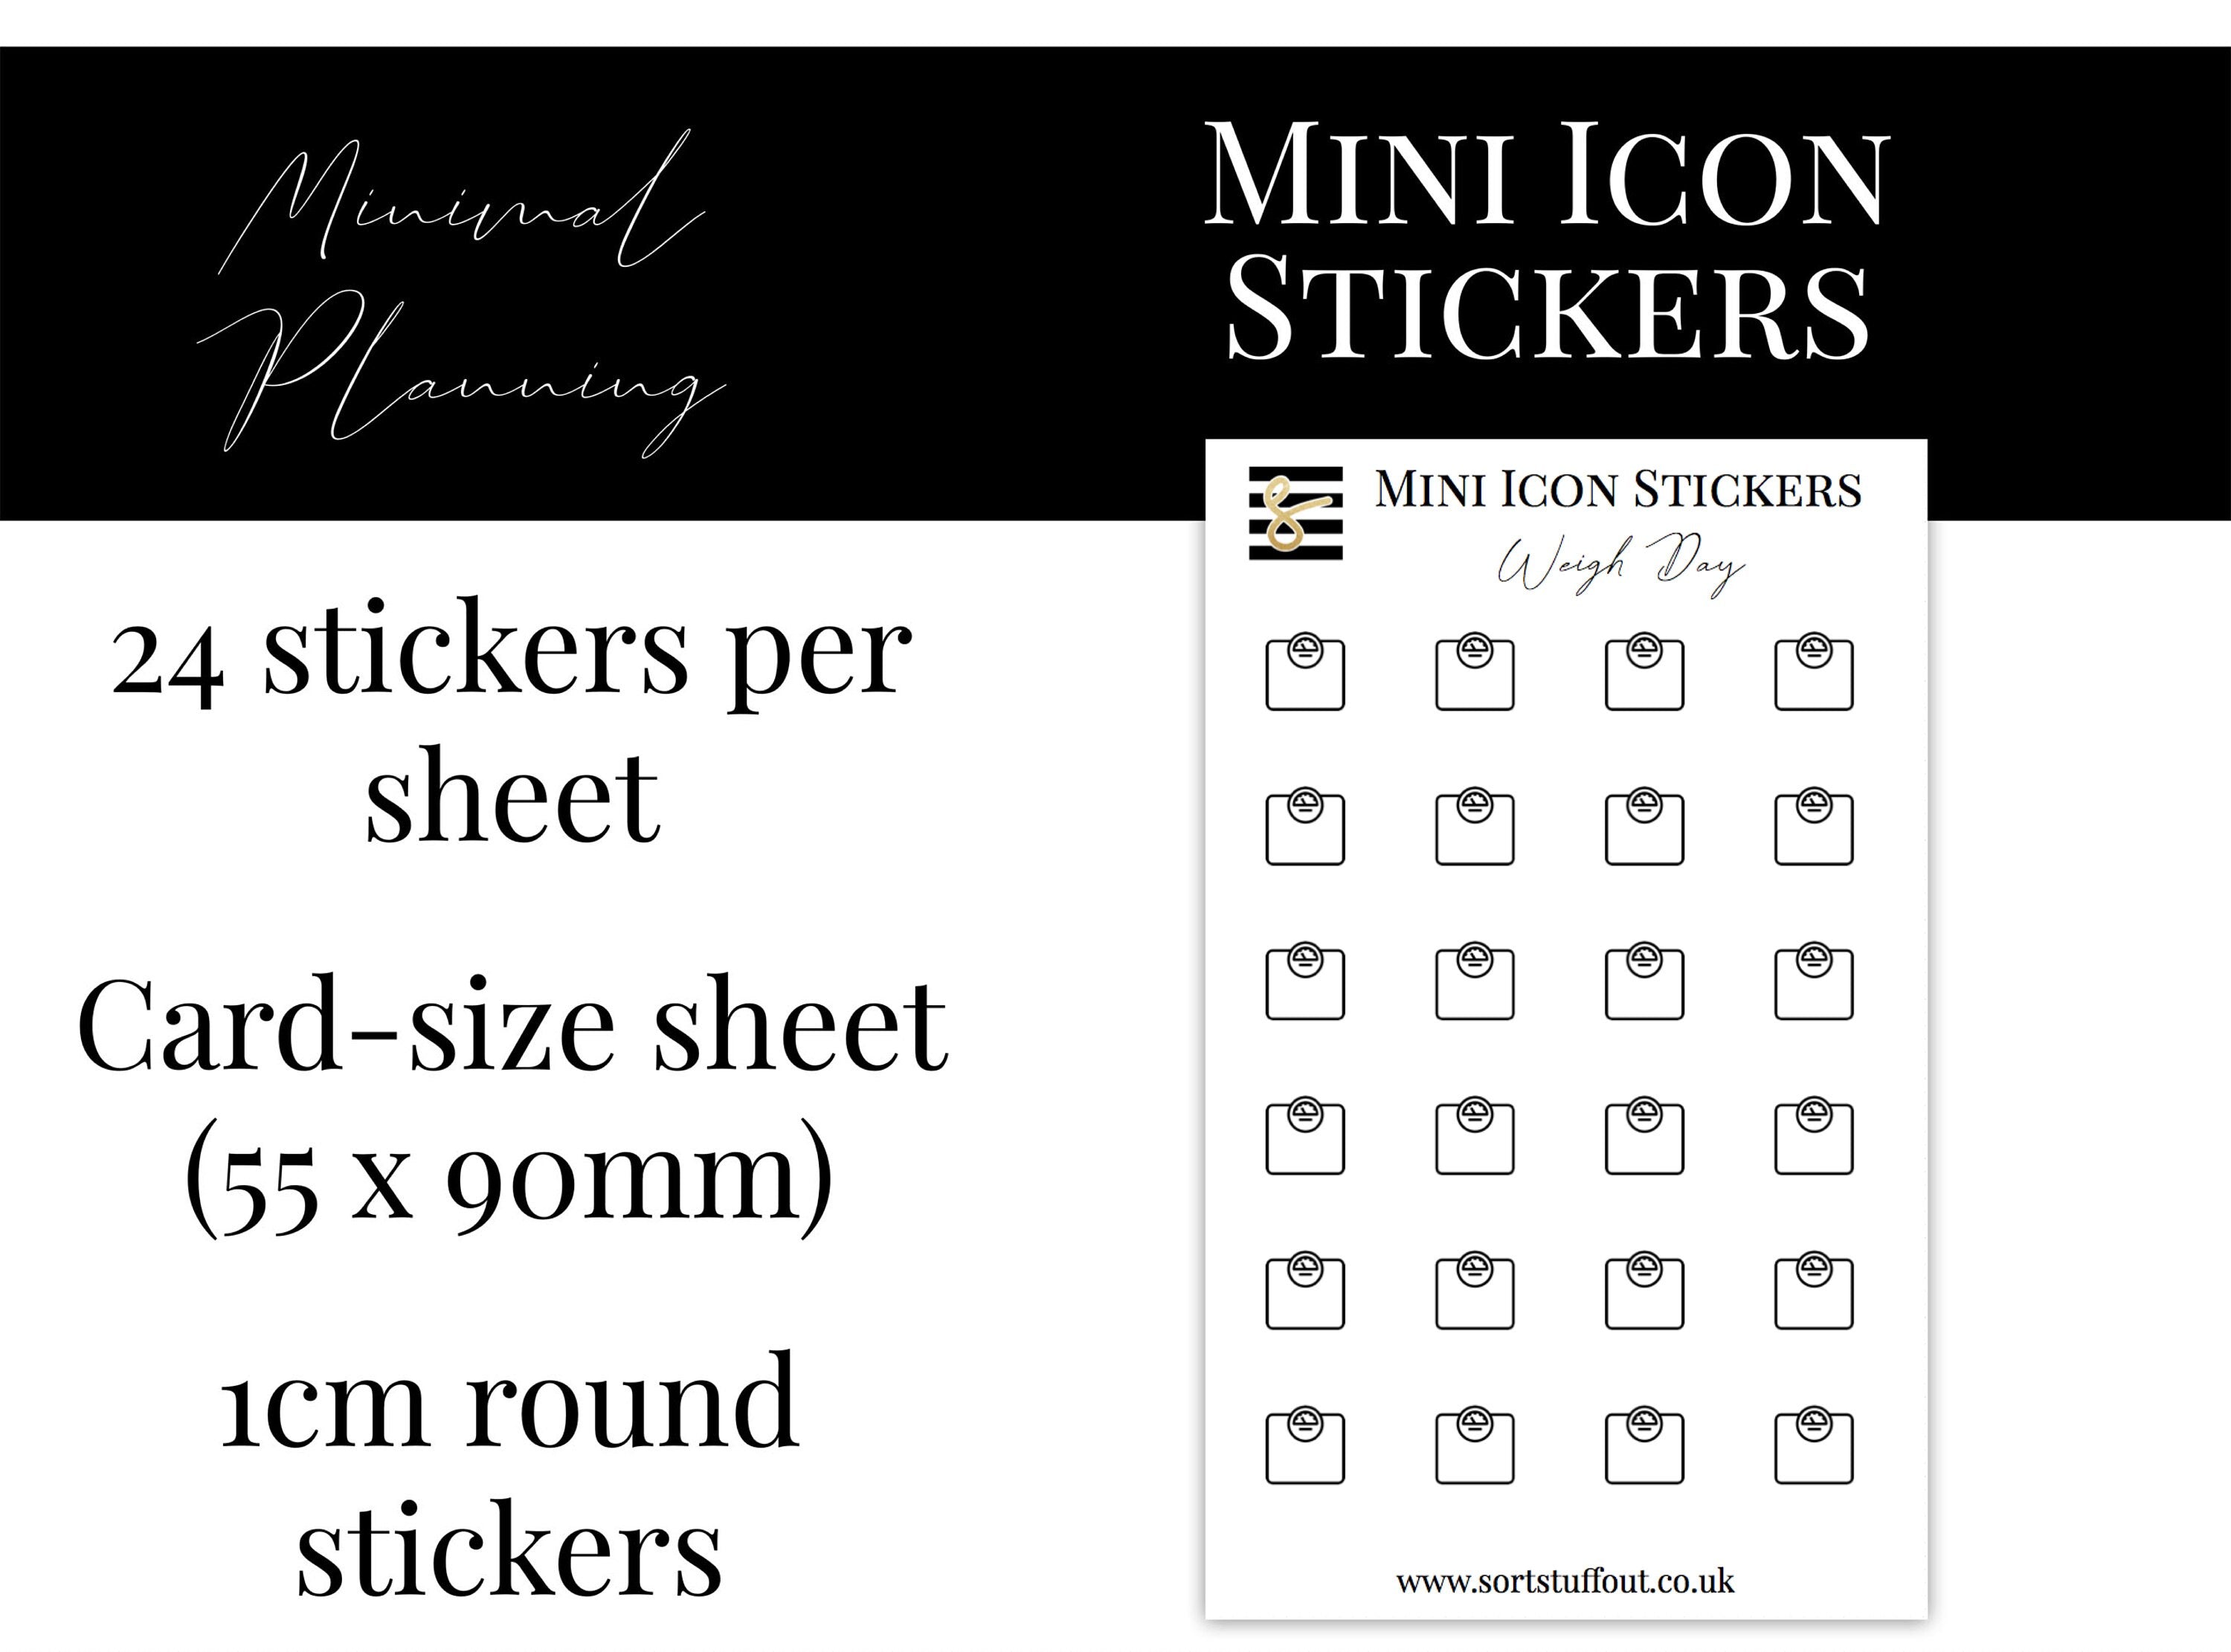 Mini Icon Stickers - Weigh Day